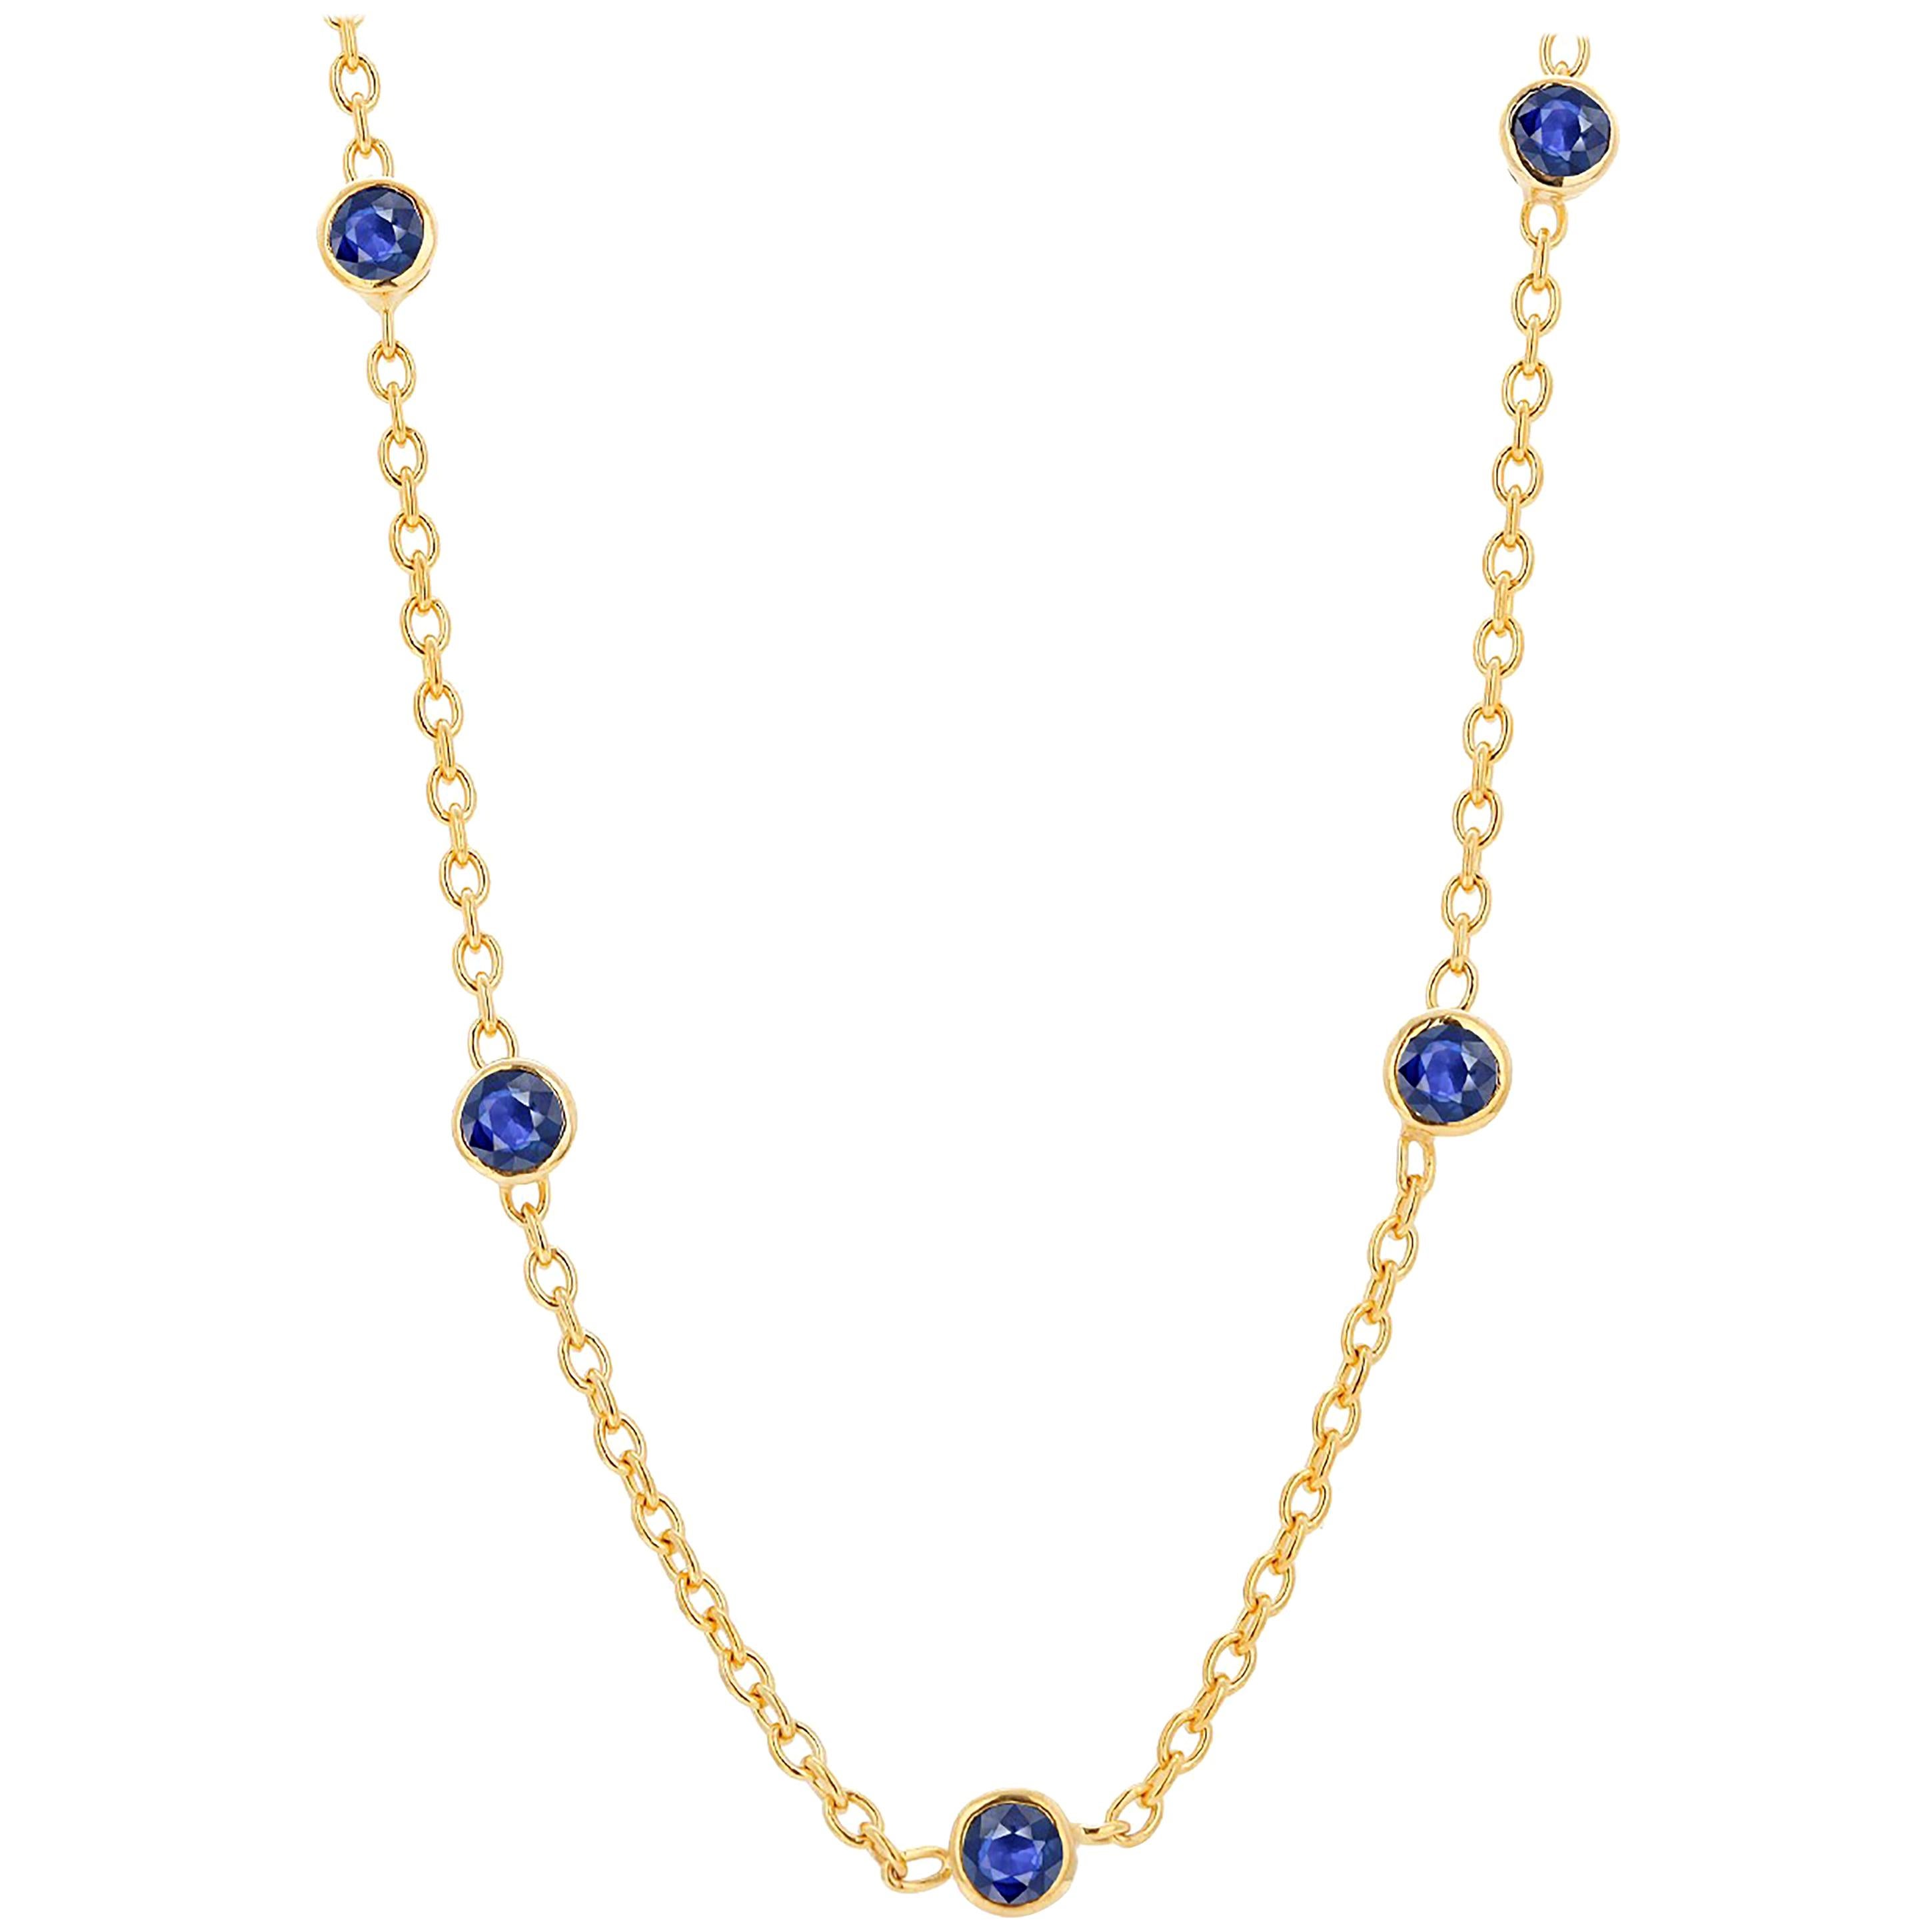 Five Natural Blue Sapphire Bezel Necklace Sterling Silver Yellow Gold-Plated